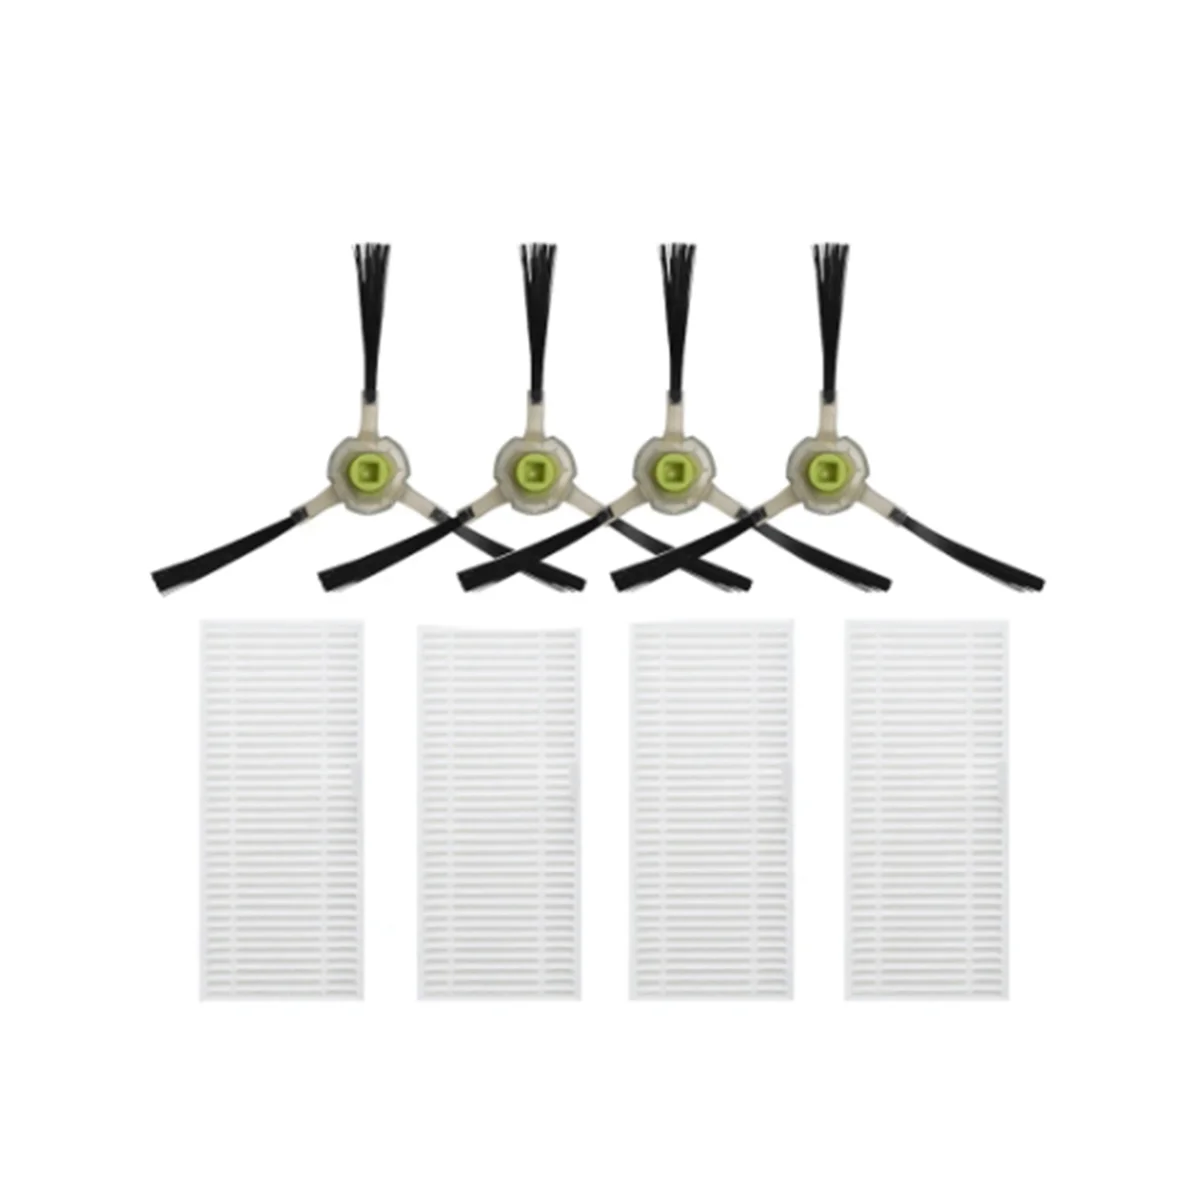 

4 Side Brushes+4 HEPA Filters for Lefant Robot Vacuum Cleaner M210 Pro M1 M201/M501A/M571/T700 Accessories